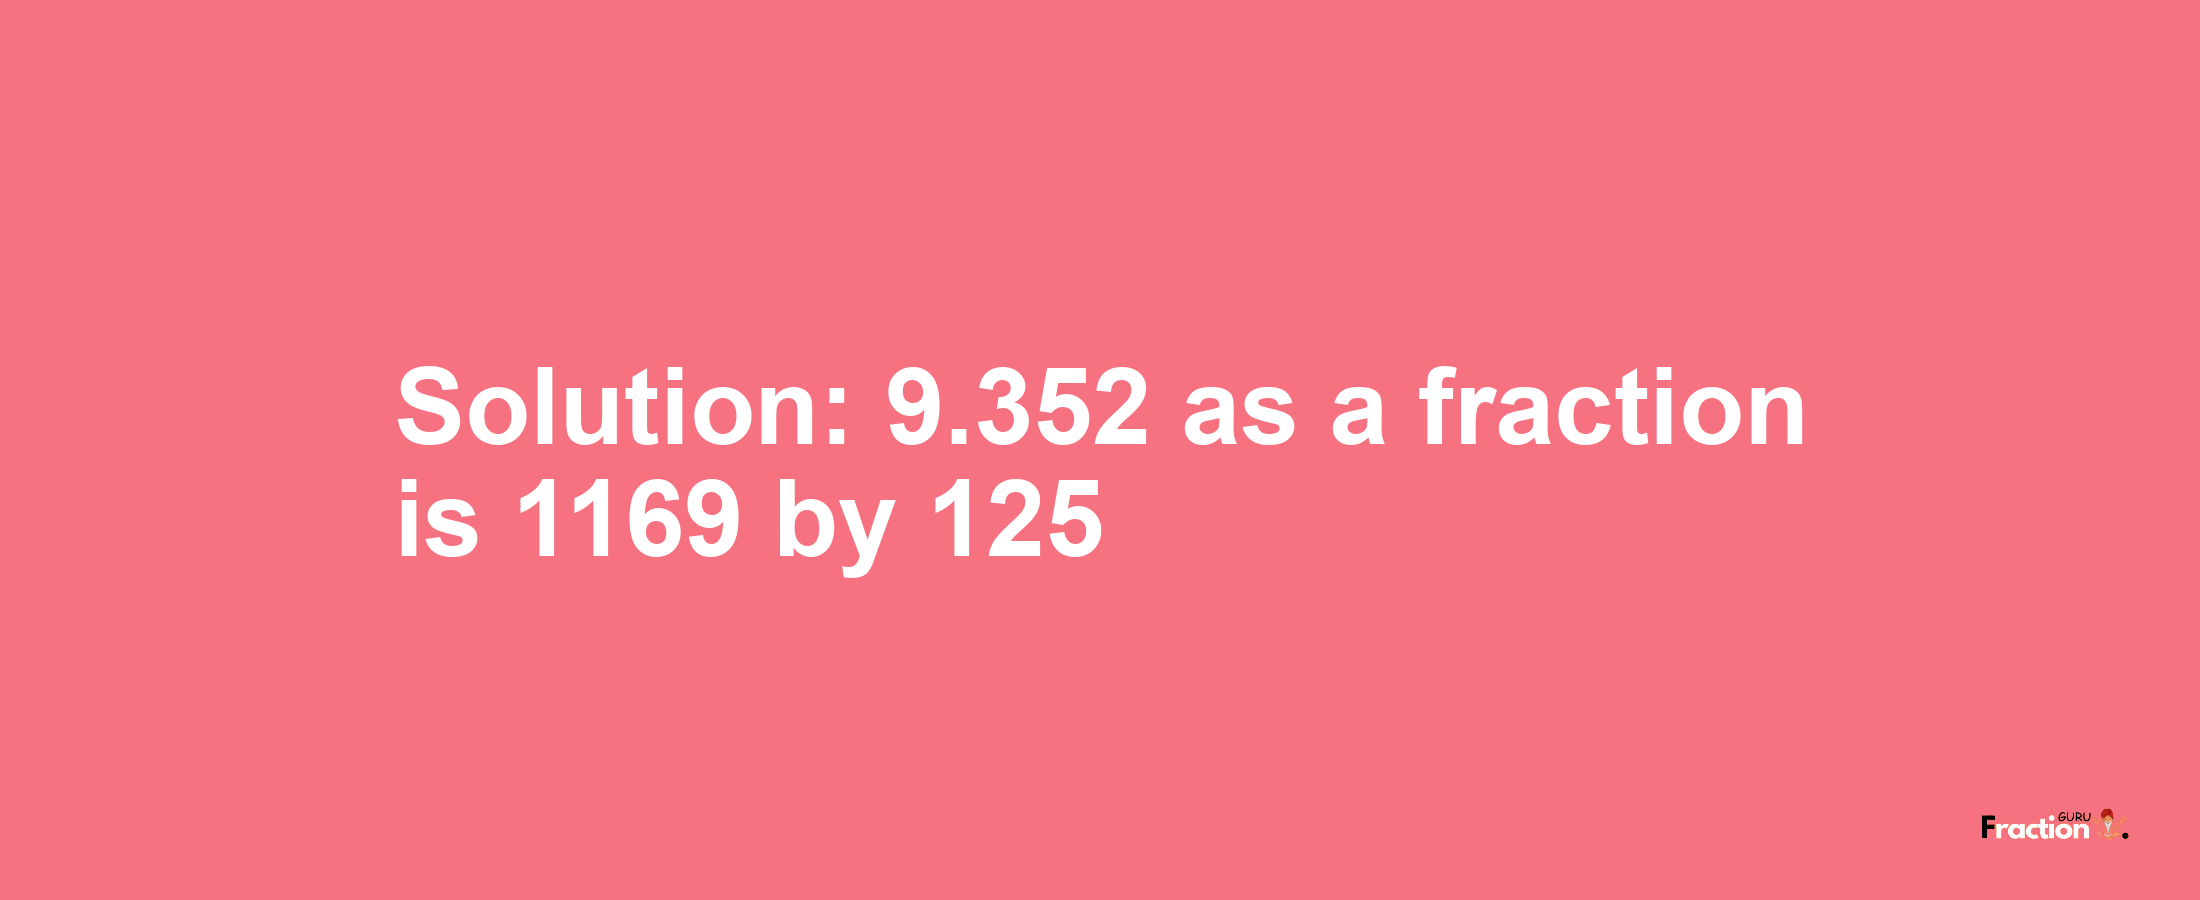 Solution:9.352 as a fraction is 1169/125